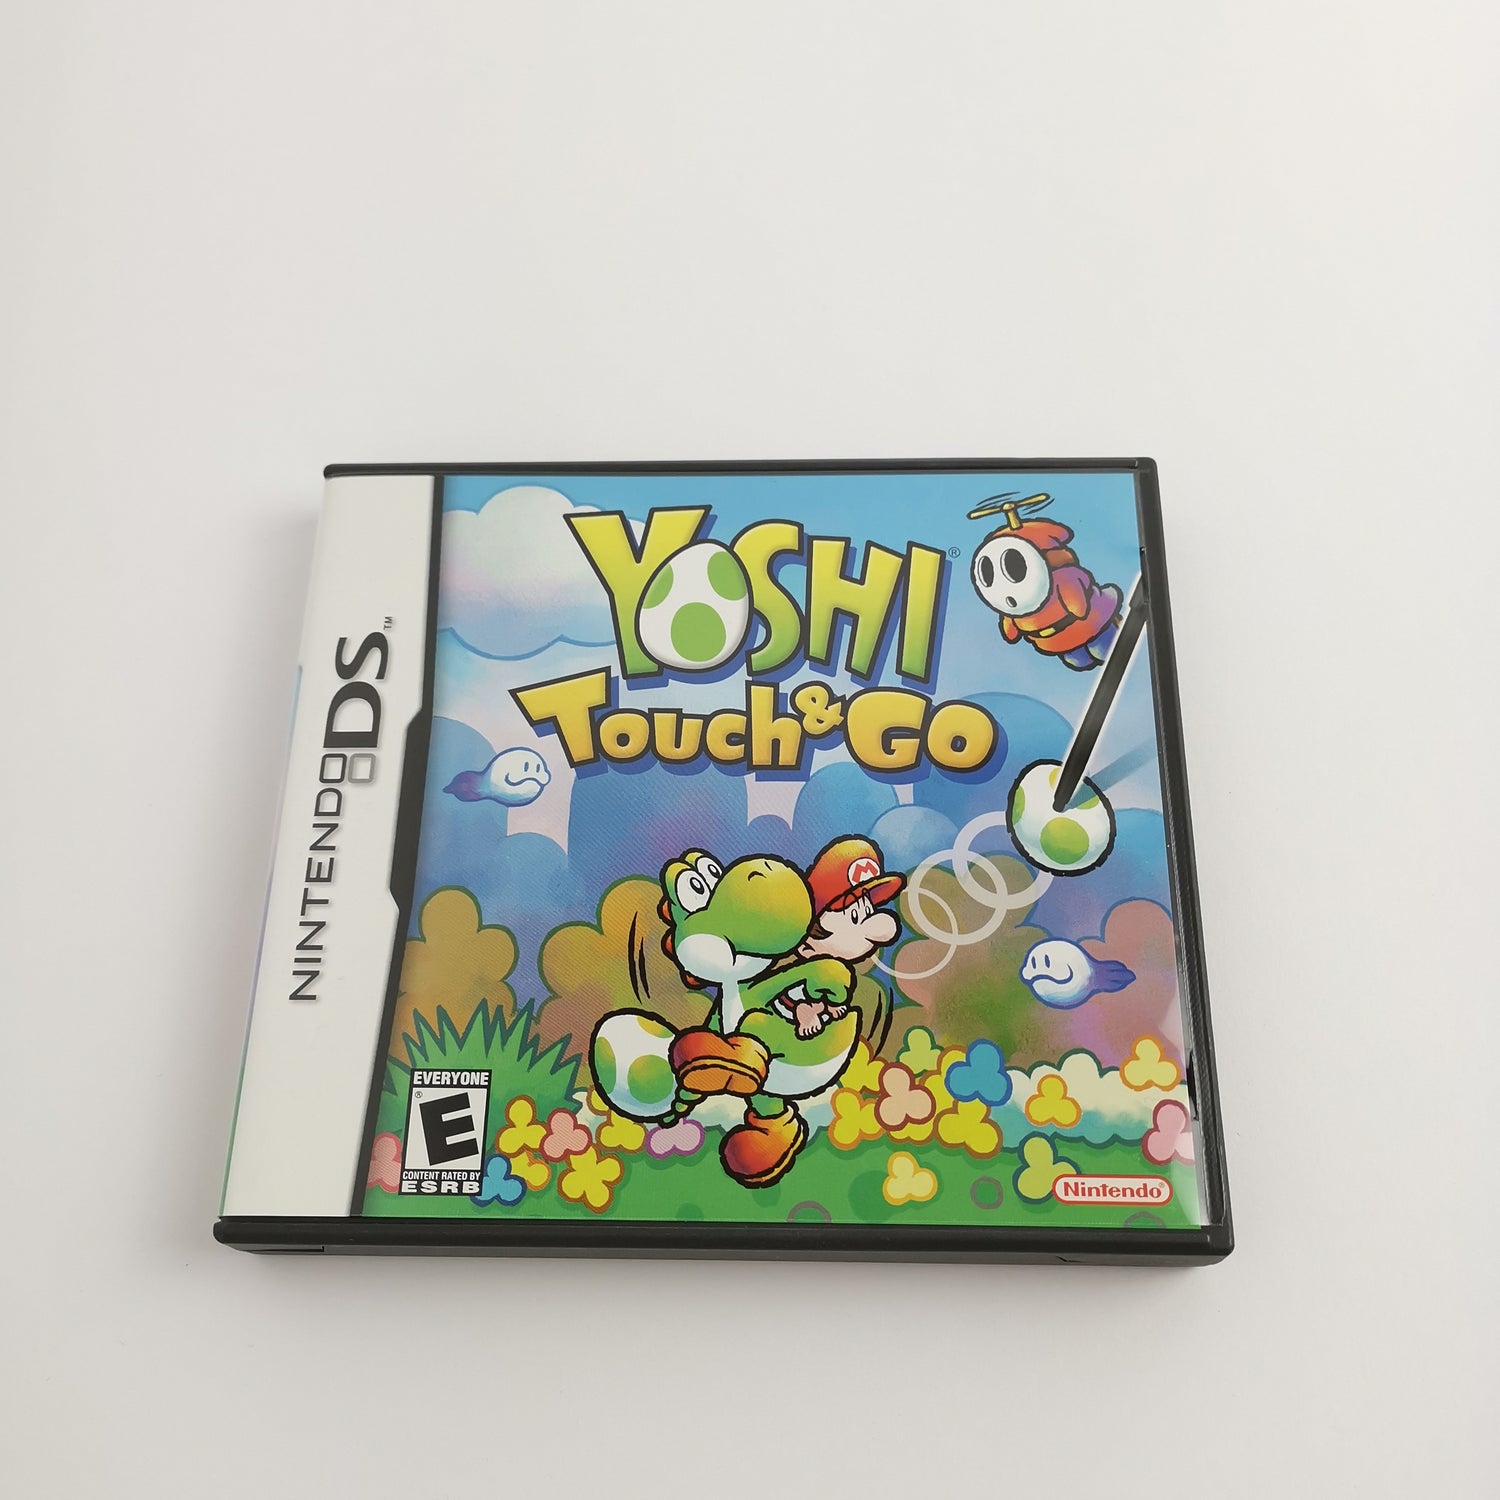 Nintendo DS game: Yoshi Touch & Go | 2DS 3DS compatible - OVP NTSC-U/C USA